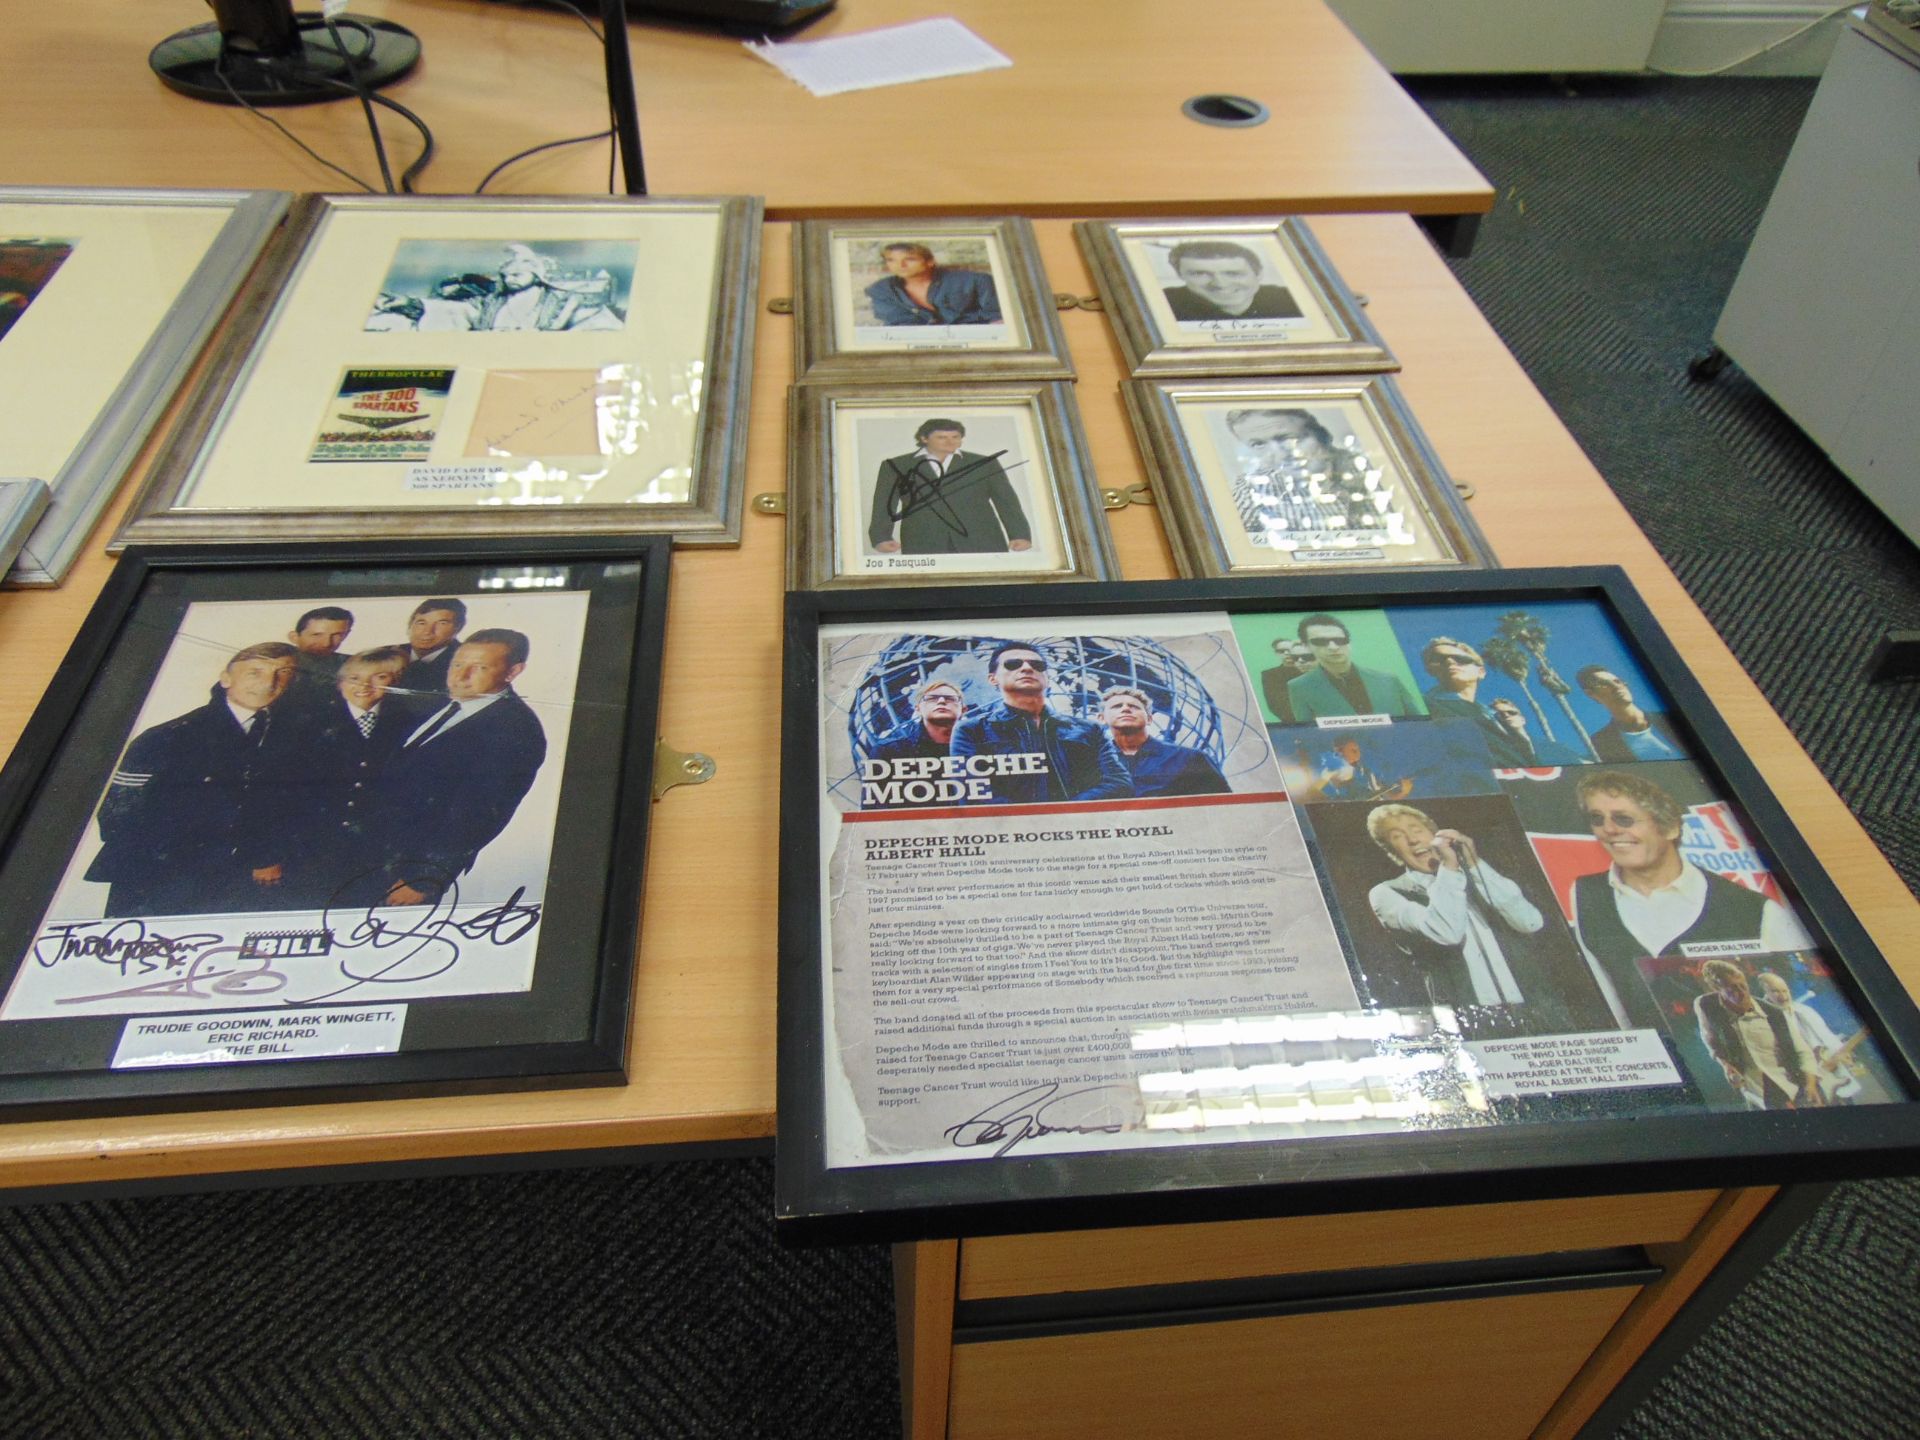 16 x Signed and Framed Pictures inc Tom Jones, Depeche Mode etc etc - Image 3 of 5